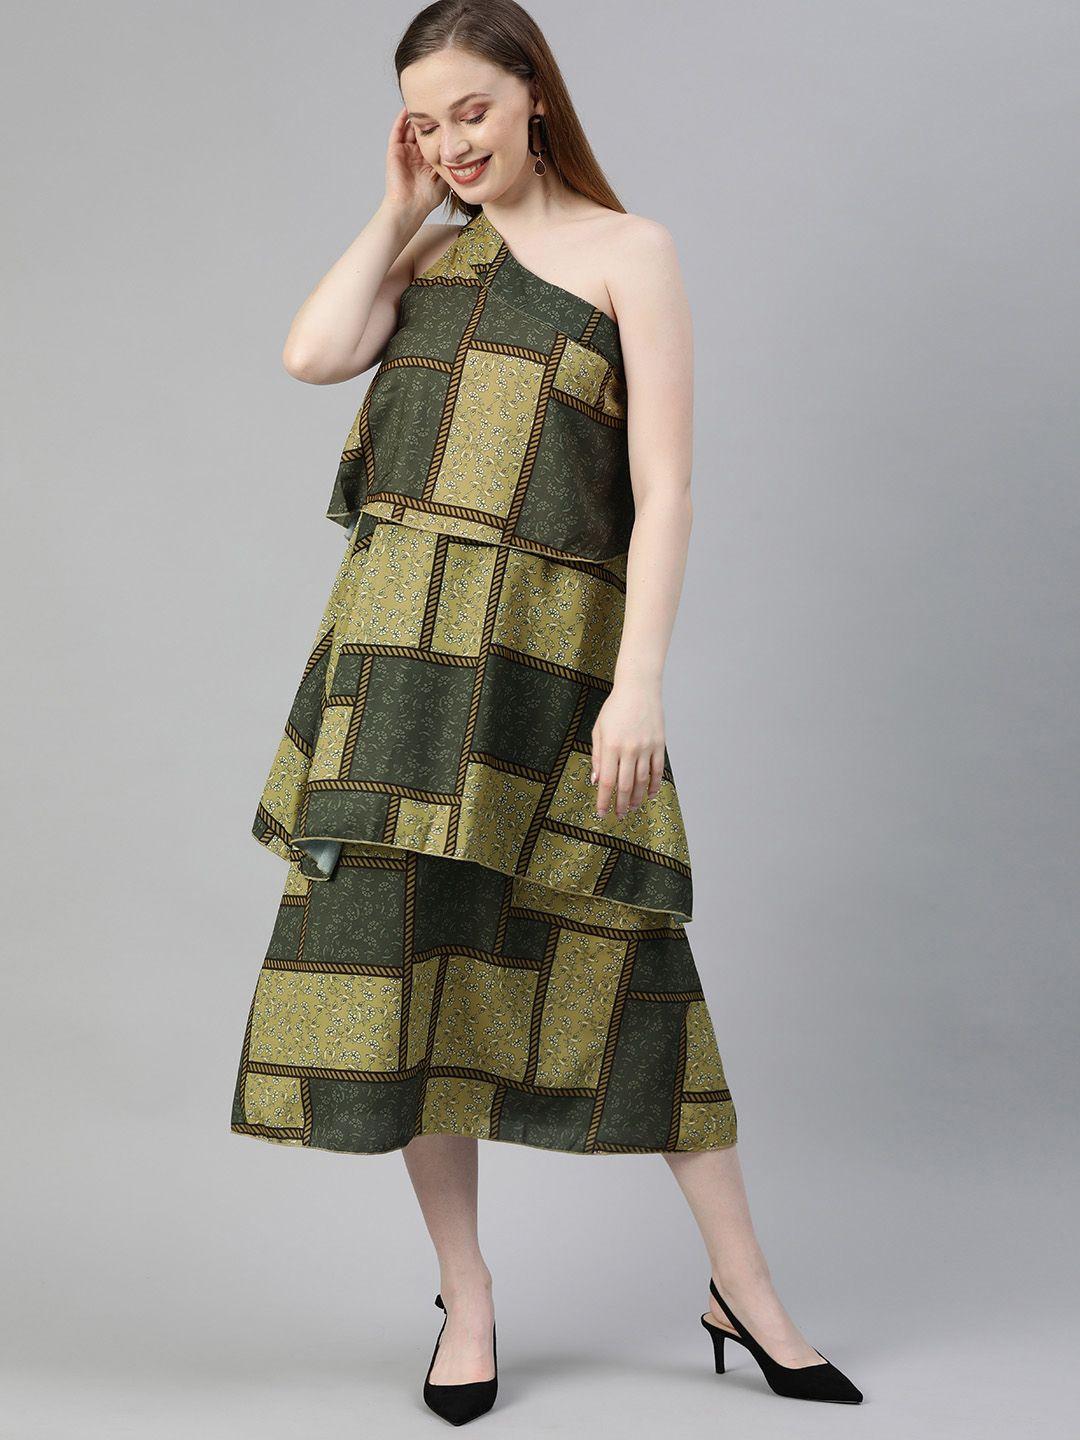 here&now-women-olive-green-&-beige-floral-printed-one-shoulder-tiered-a-line-dress